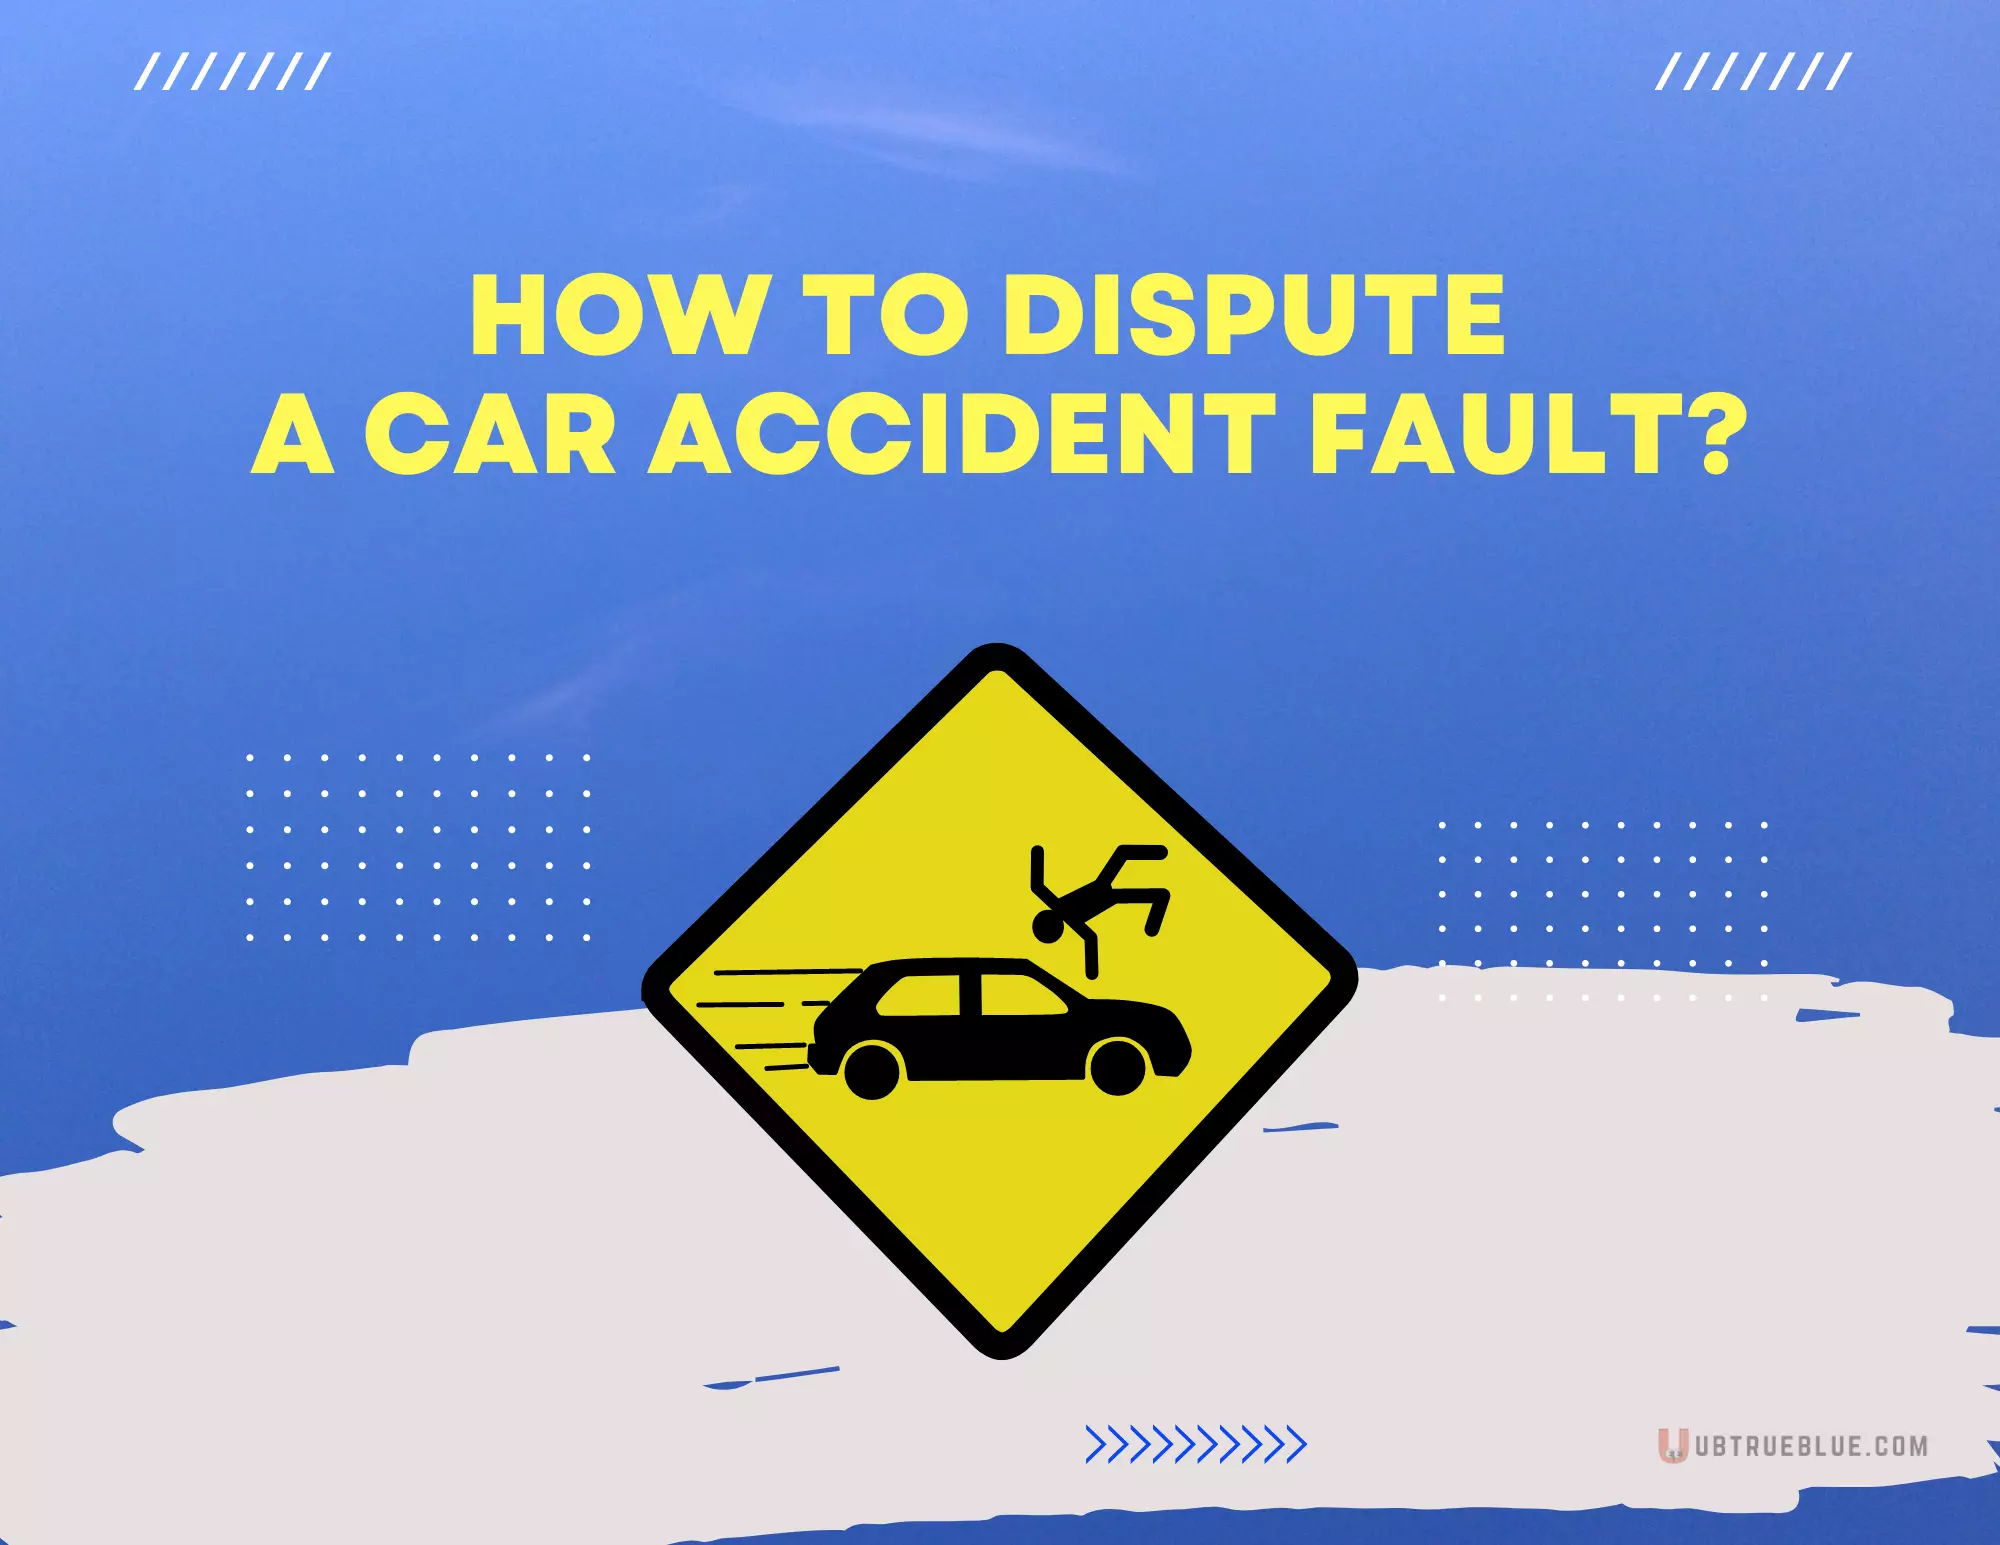 How To Dispute A Car Accident Fault Ubtrueblue Automotive Tips Fault? Step-by-Step Guide Property Damage Witness Statements Insurance Determination Claim  Full